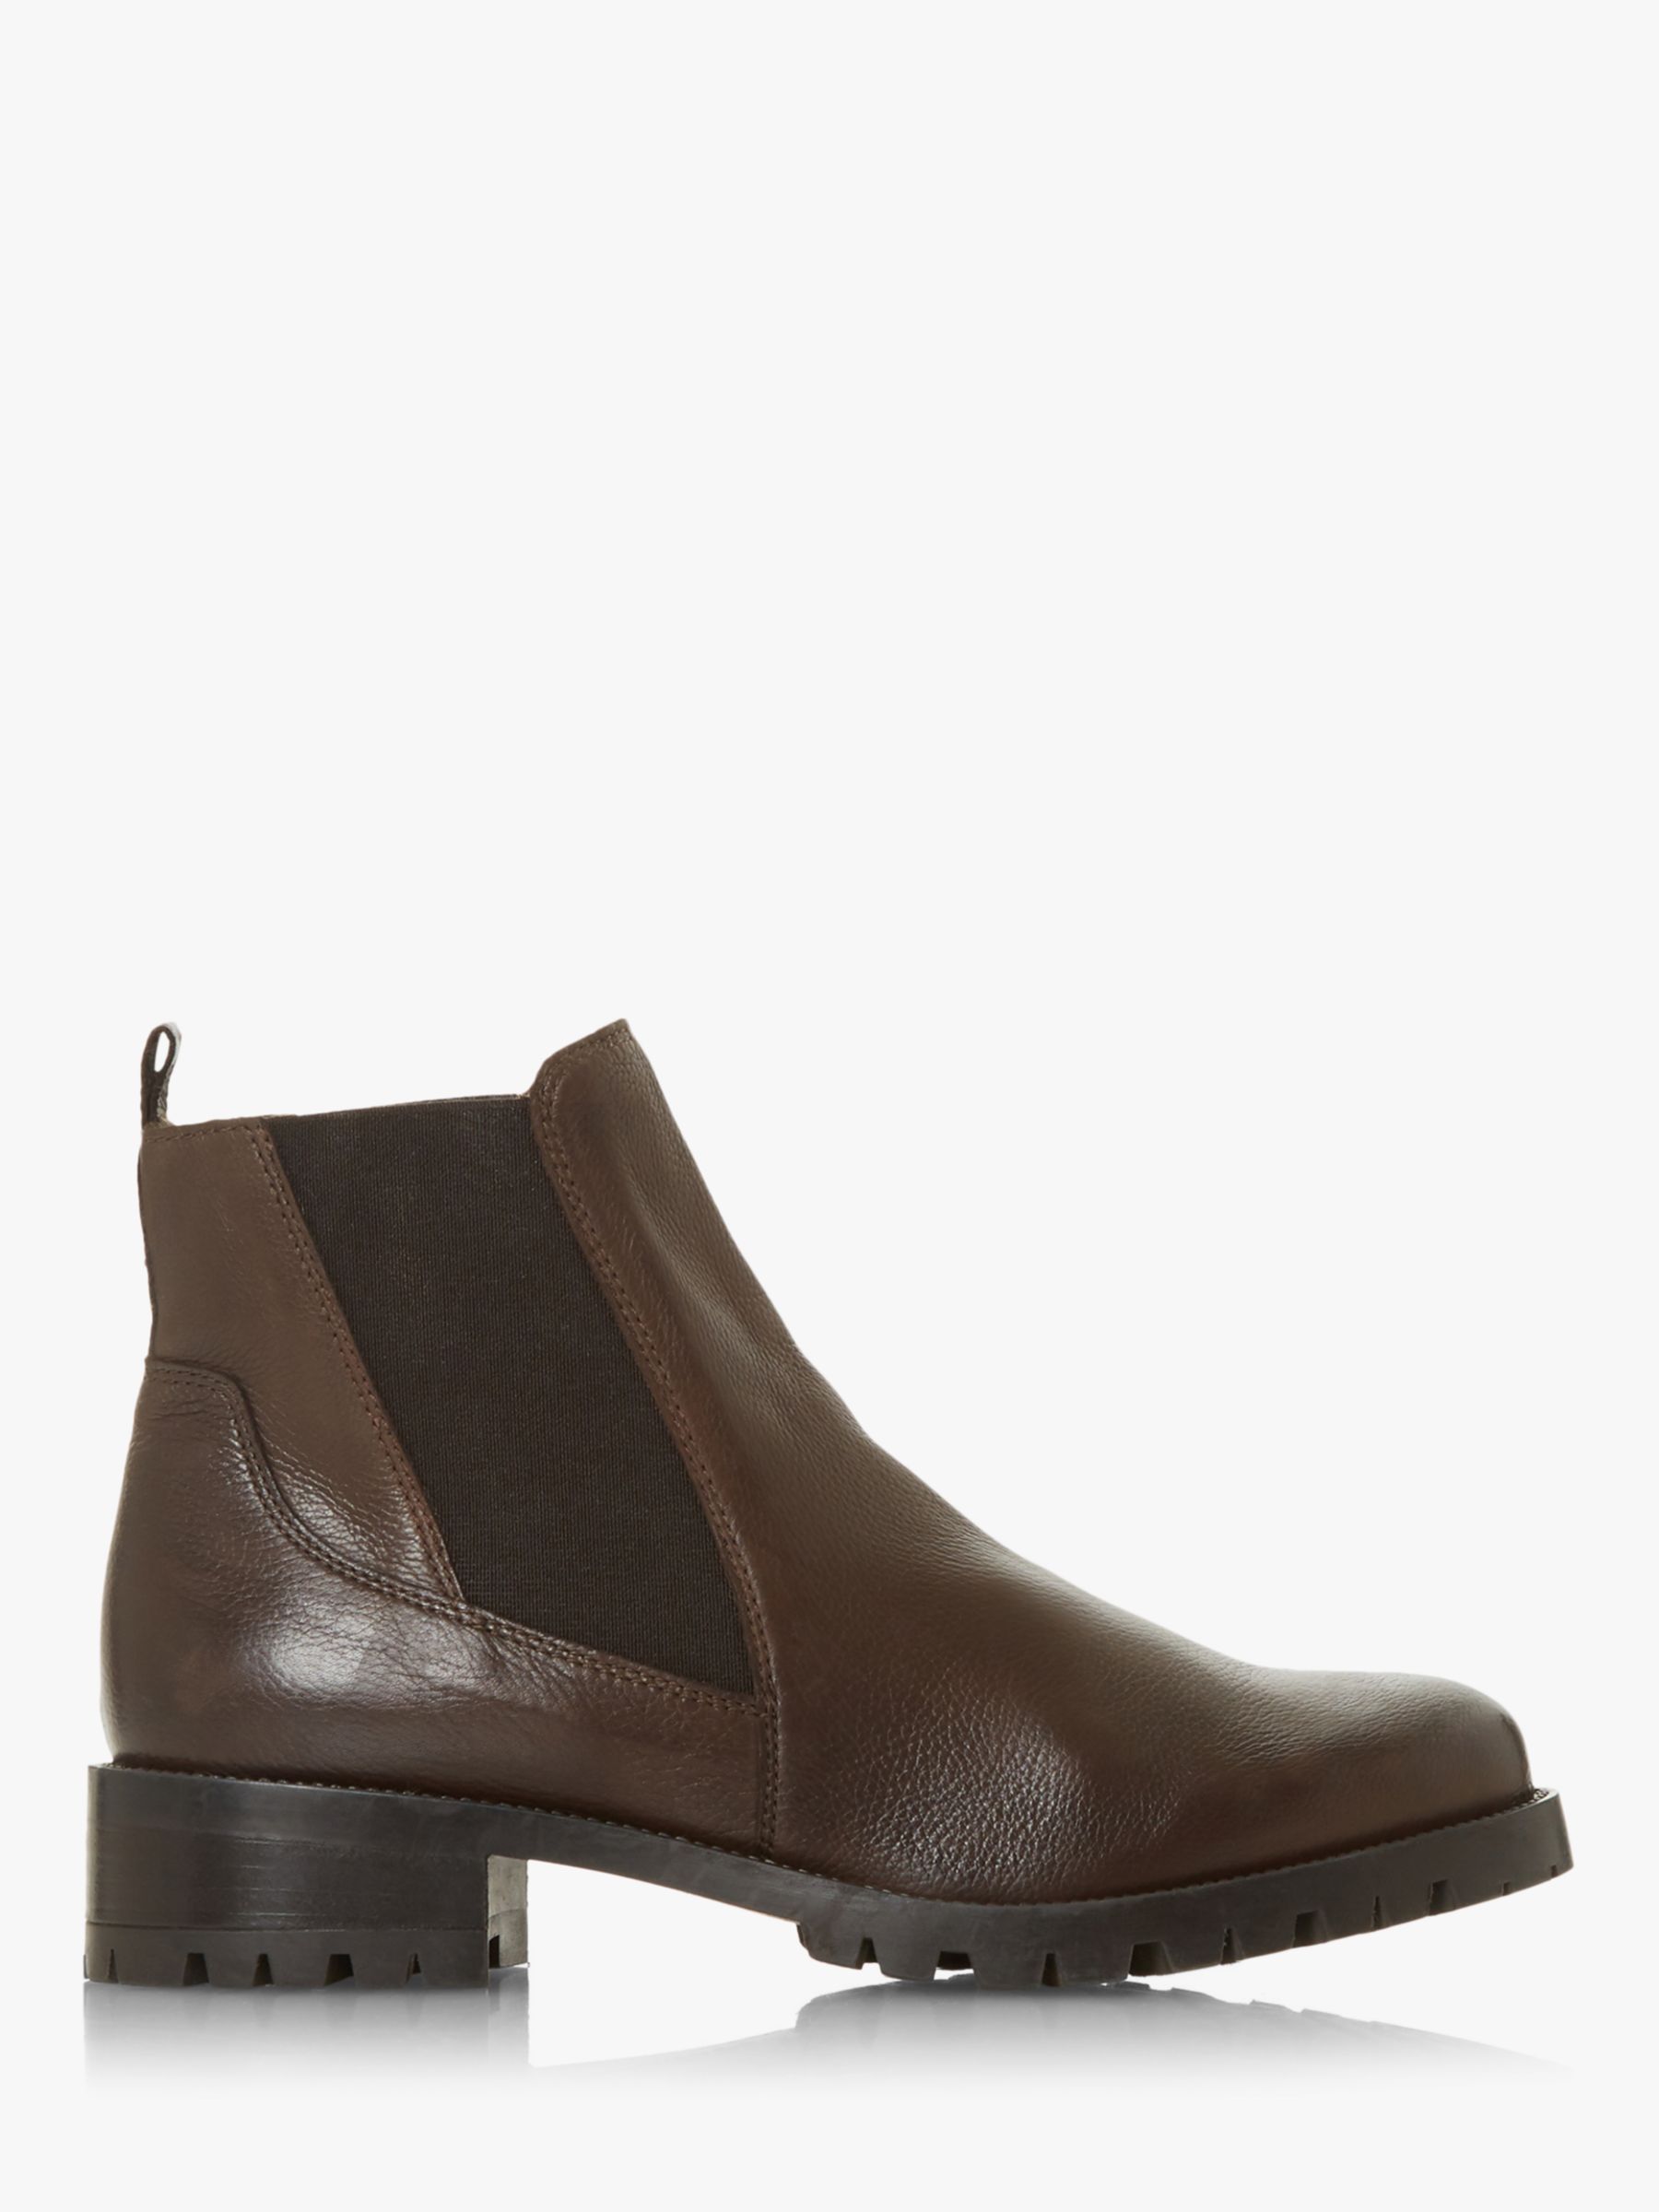 Dune Powerful Leather Chelsea Boots